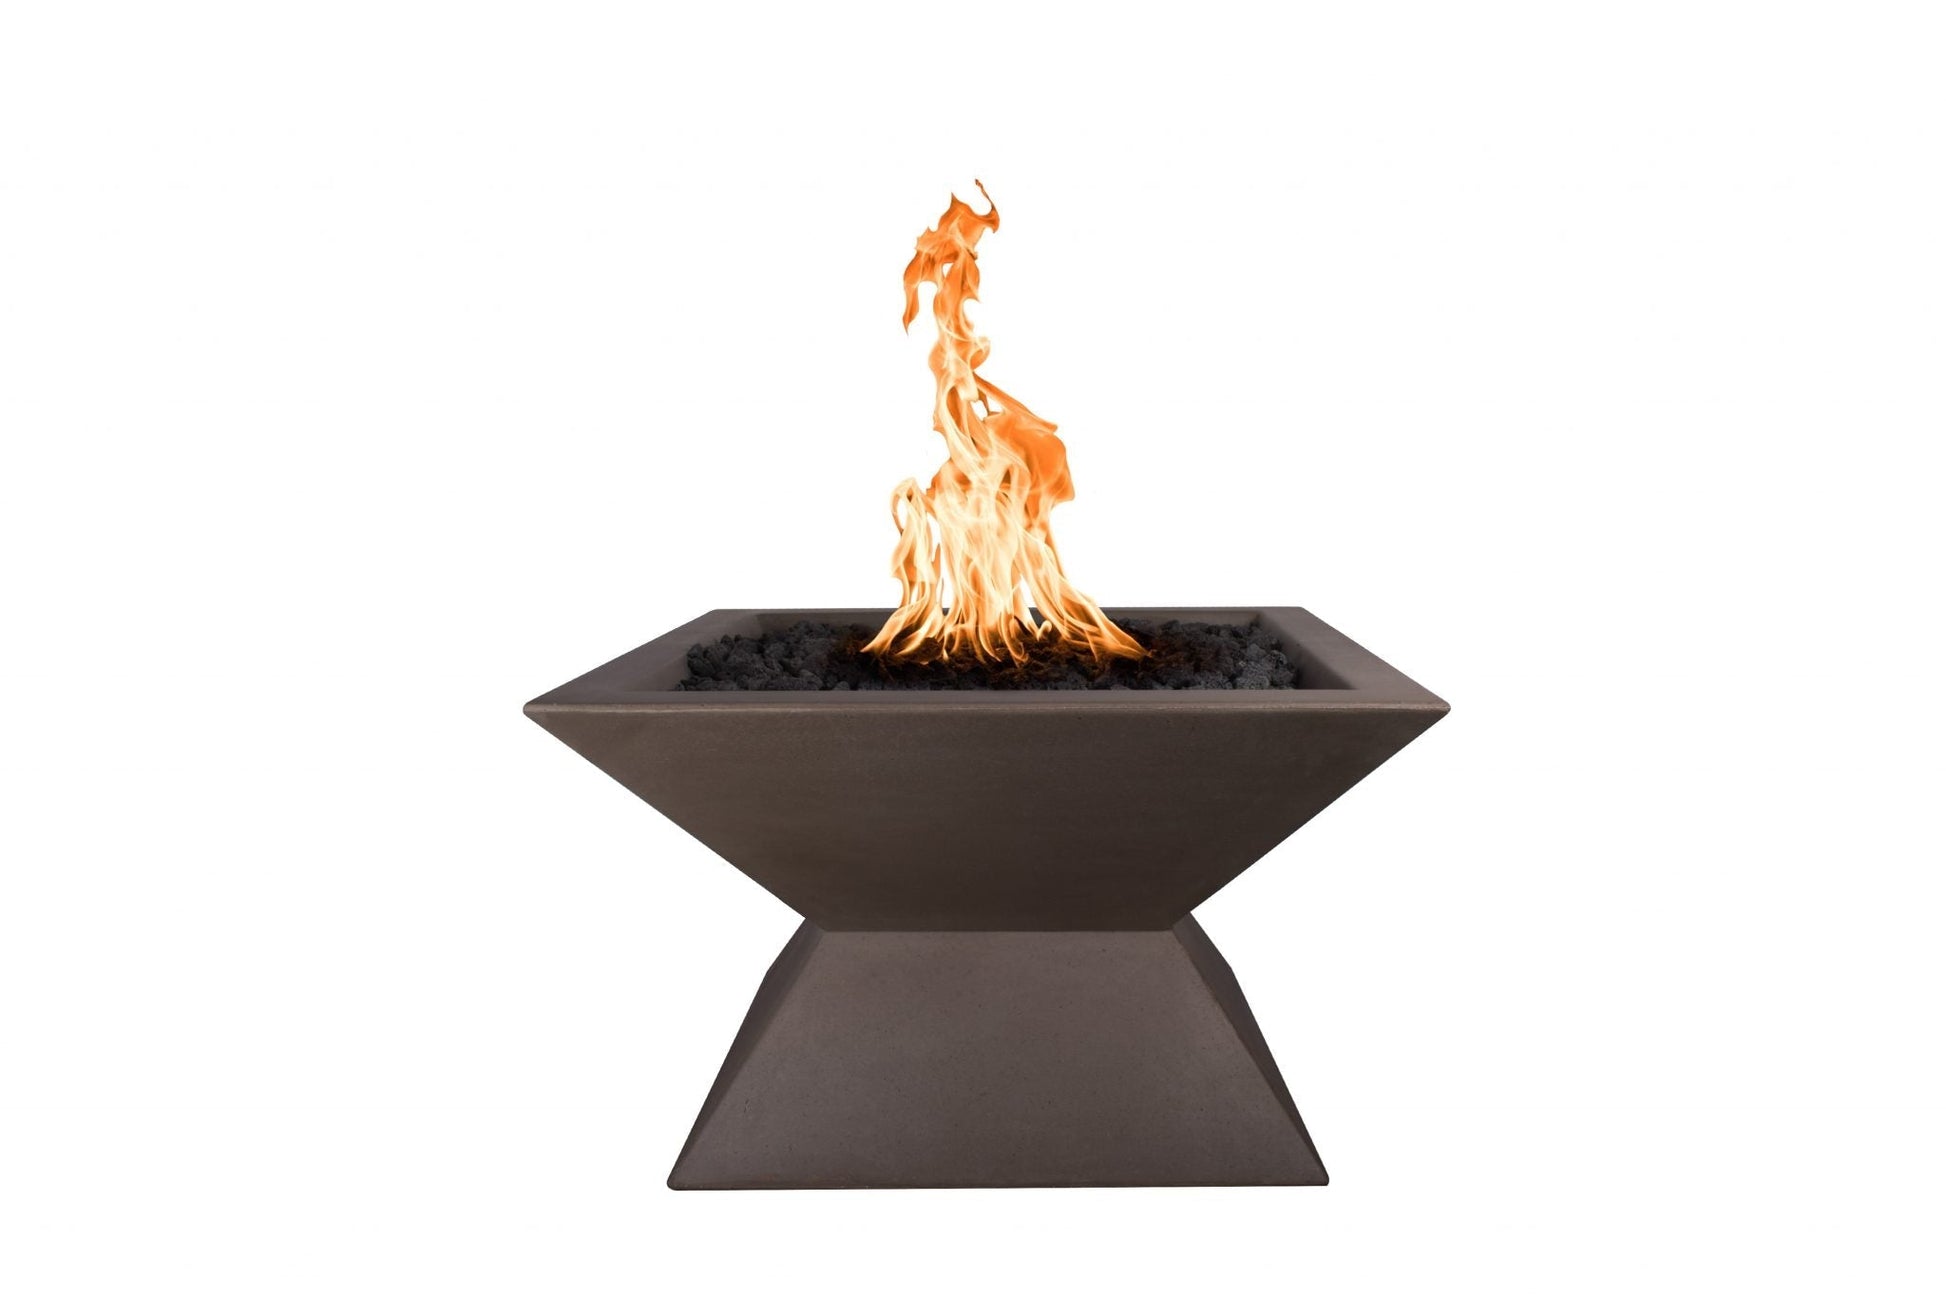 The Outdoor Plus Square Uxmal 30" Metallic Silver GFRC Concrete Liquid Propane Fire Pit with 12V Electronic Ignition